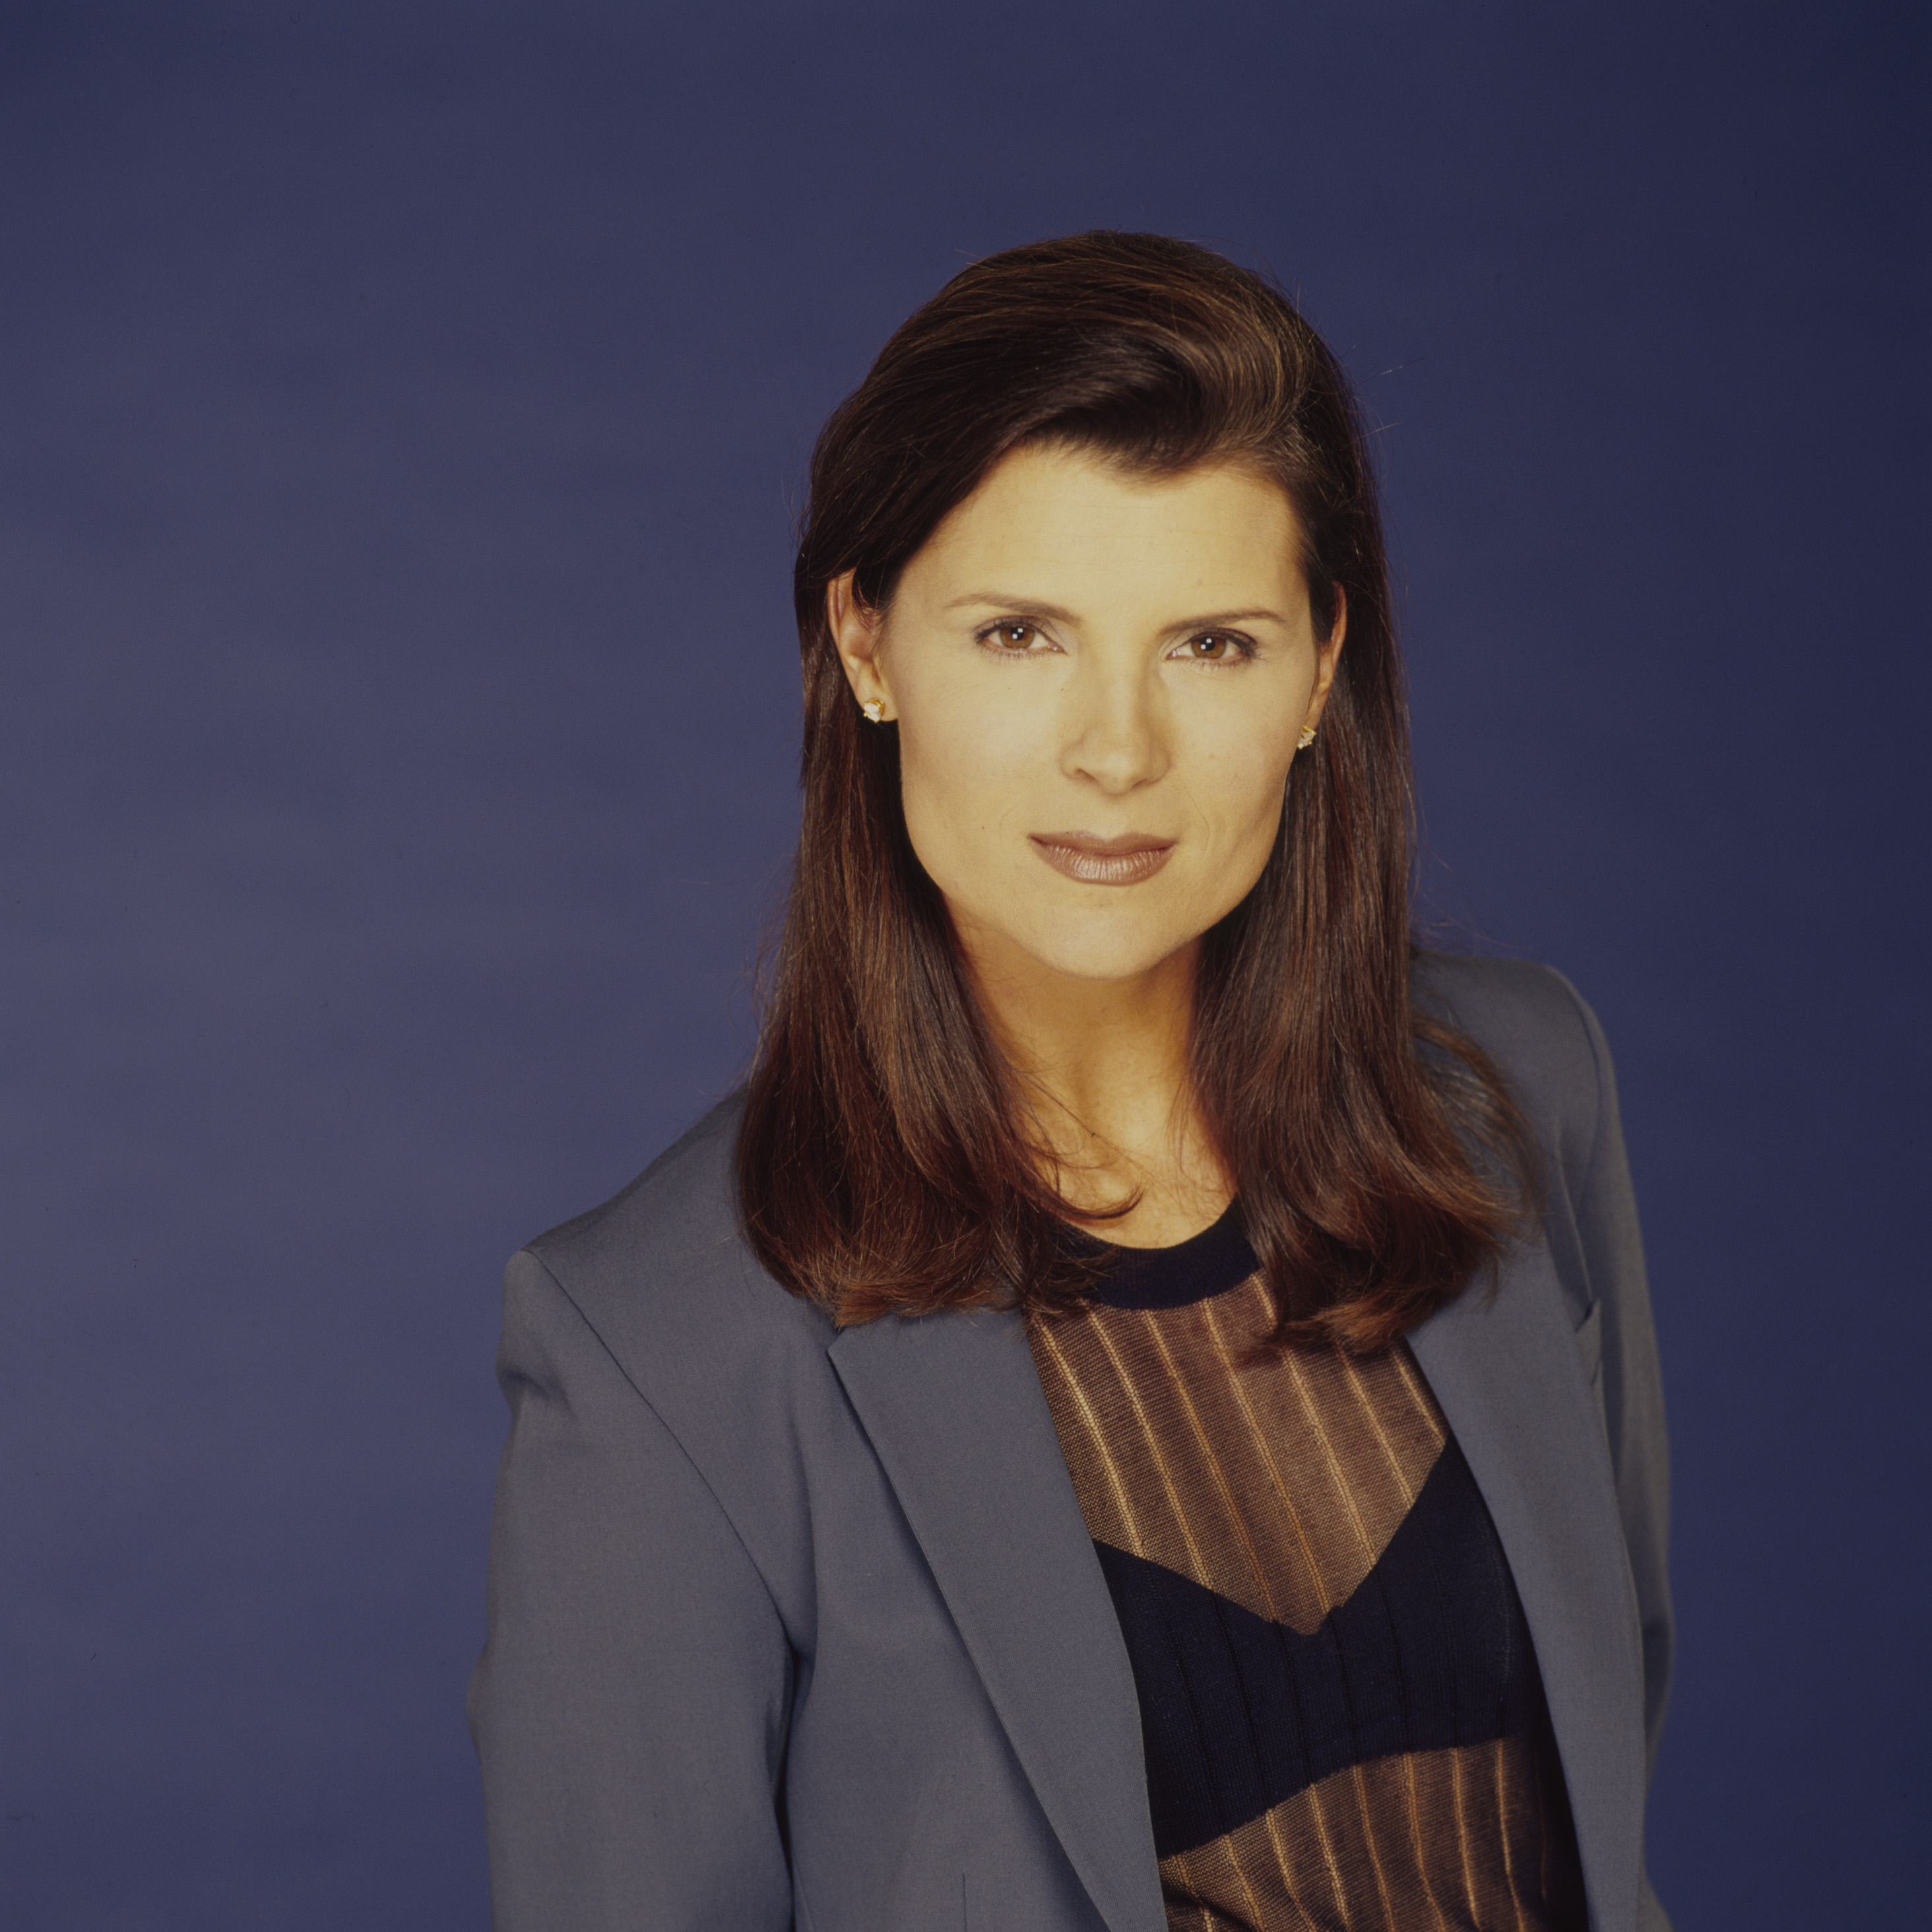 'The Bold and the Beautiful' actress Kimberlin Brown plays Sheila Carter on the CBS soap opera.